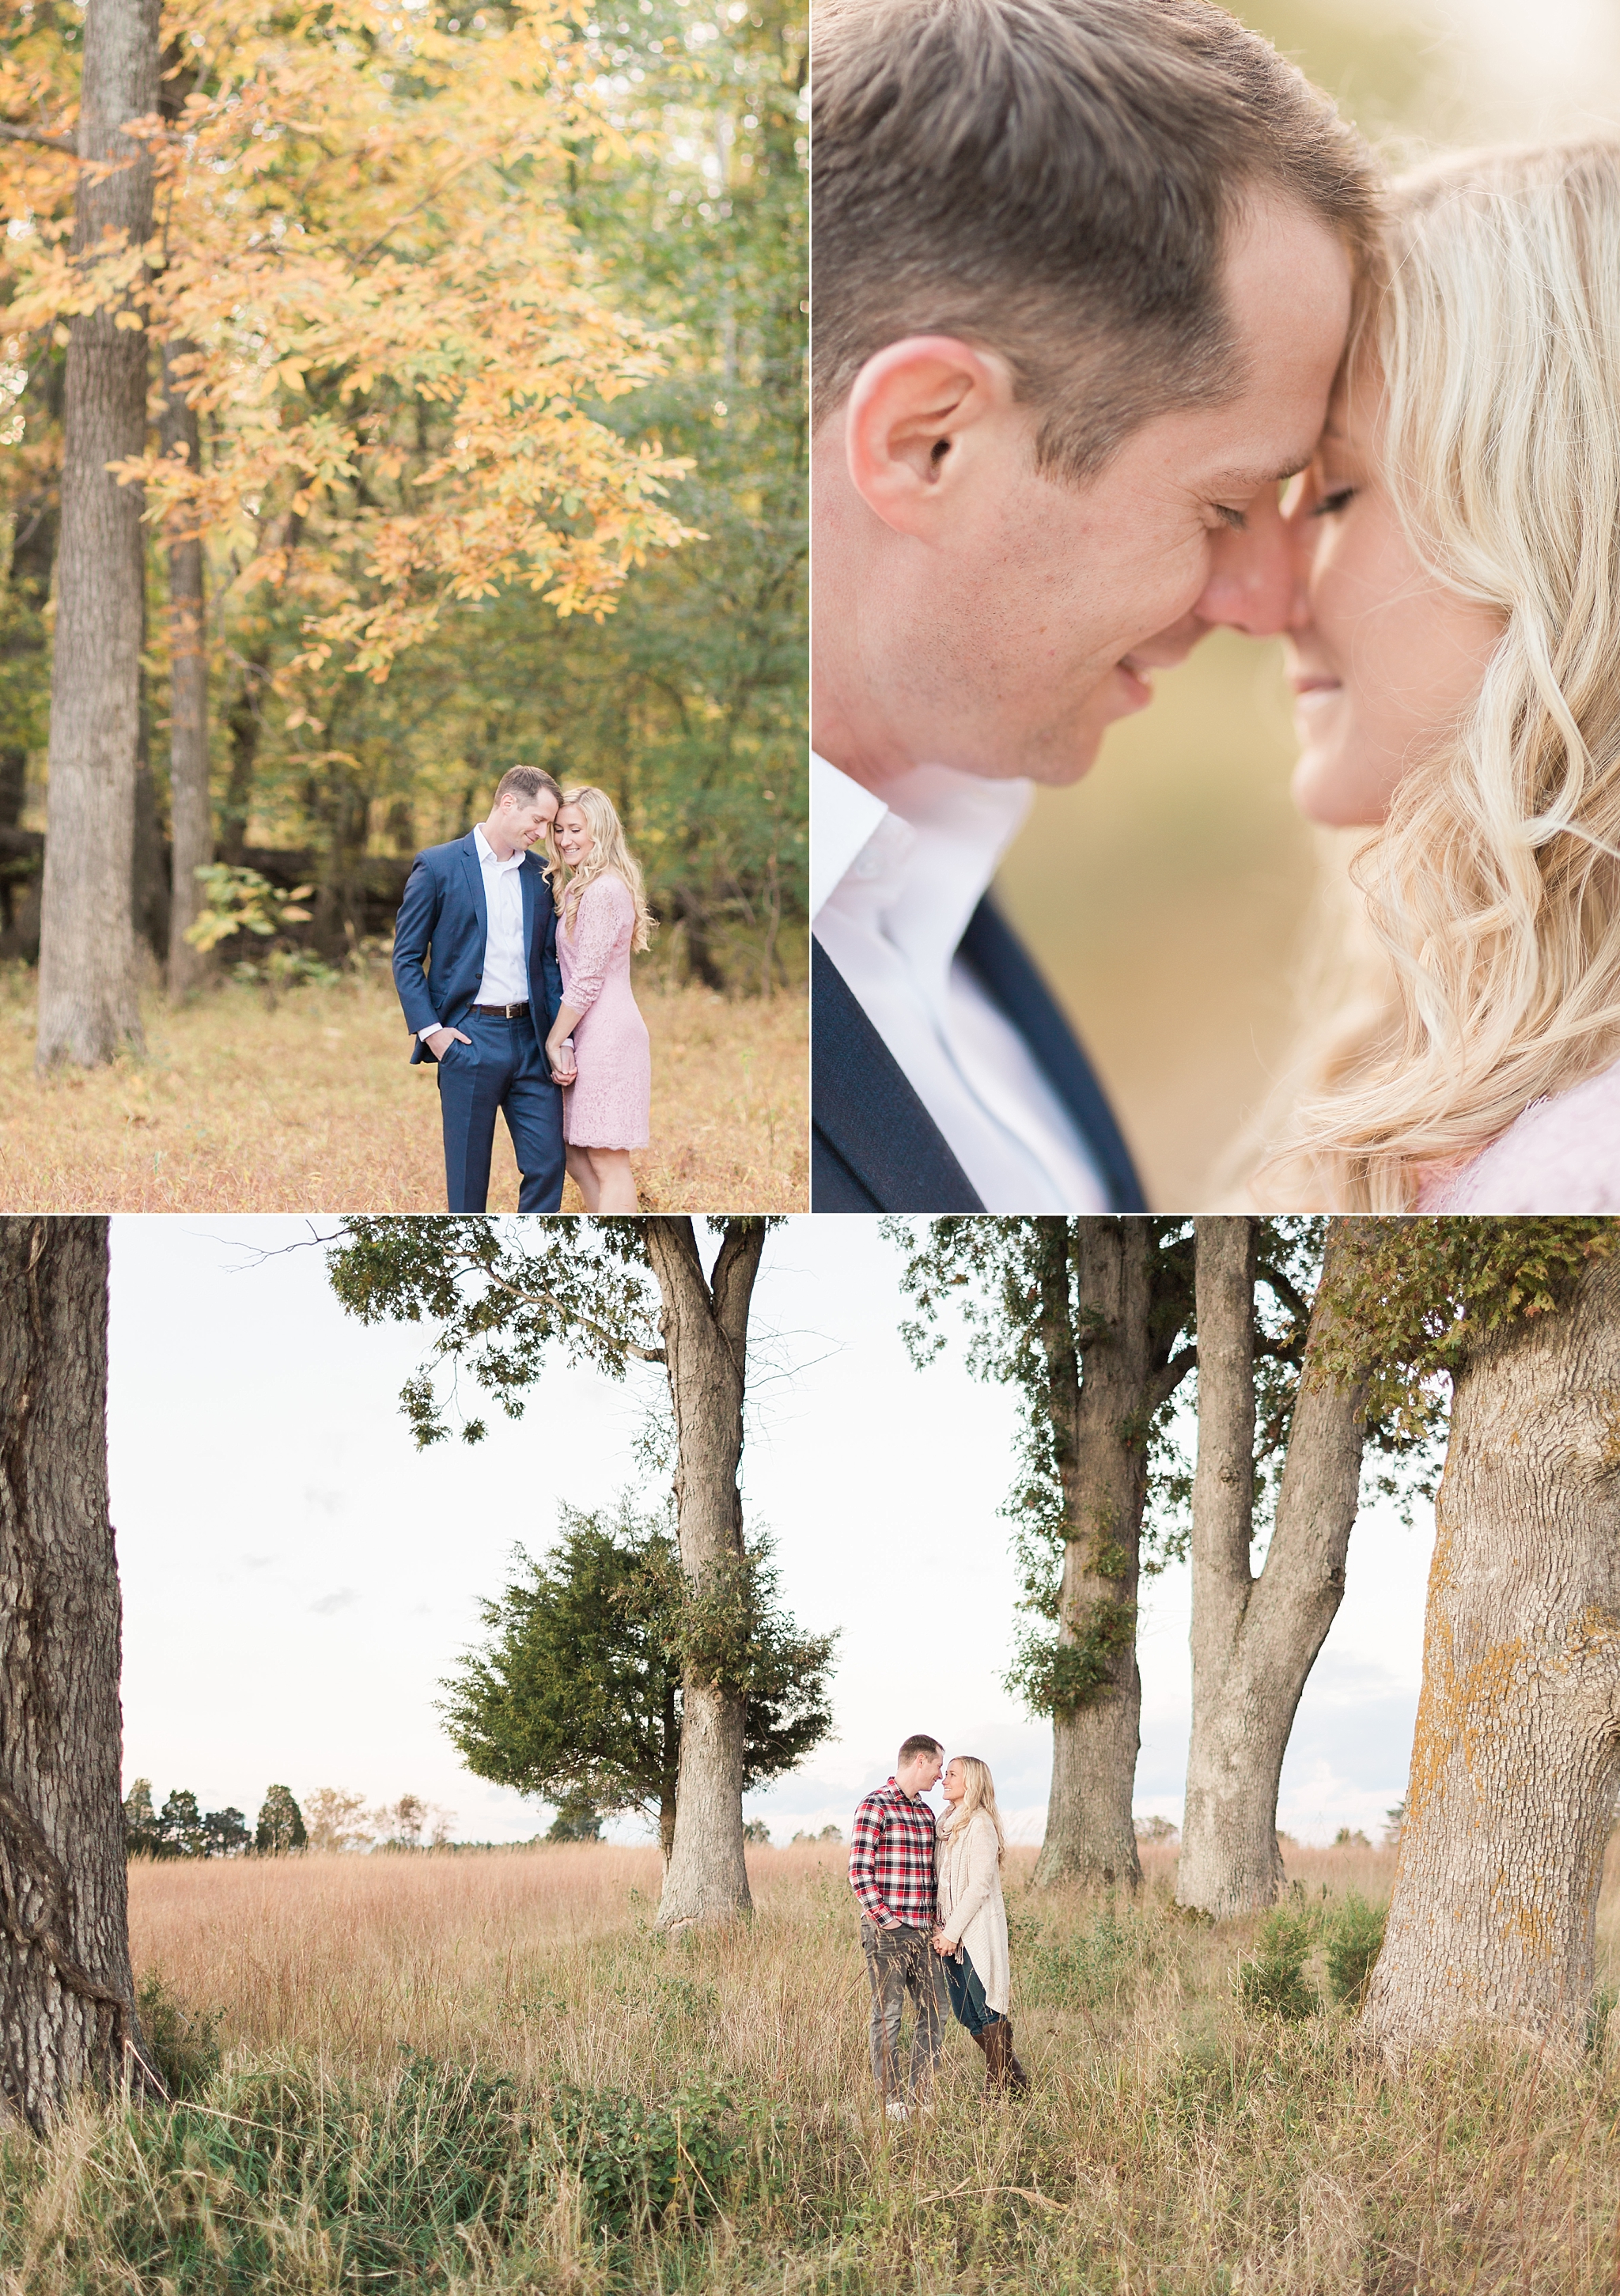 Looking for the best engagement session locations in Northern Virginia? Here are the top 10 from seasoned wedding photographer, Alicia Lacey!